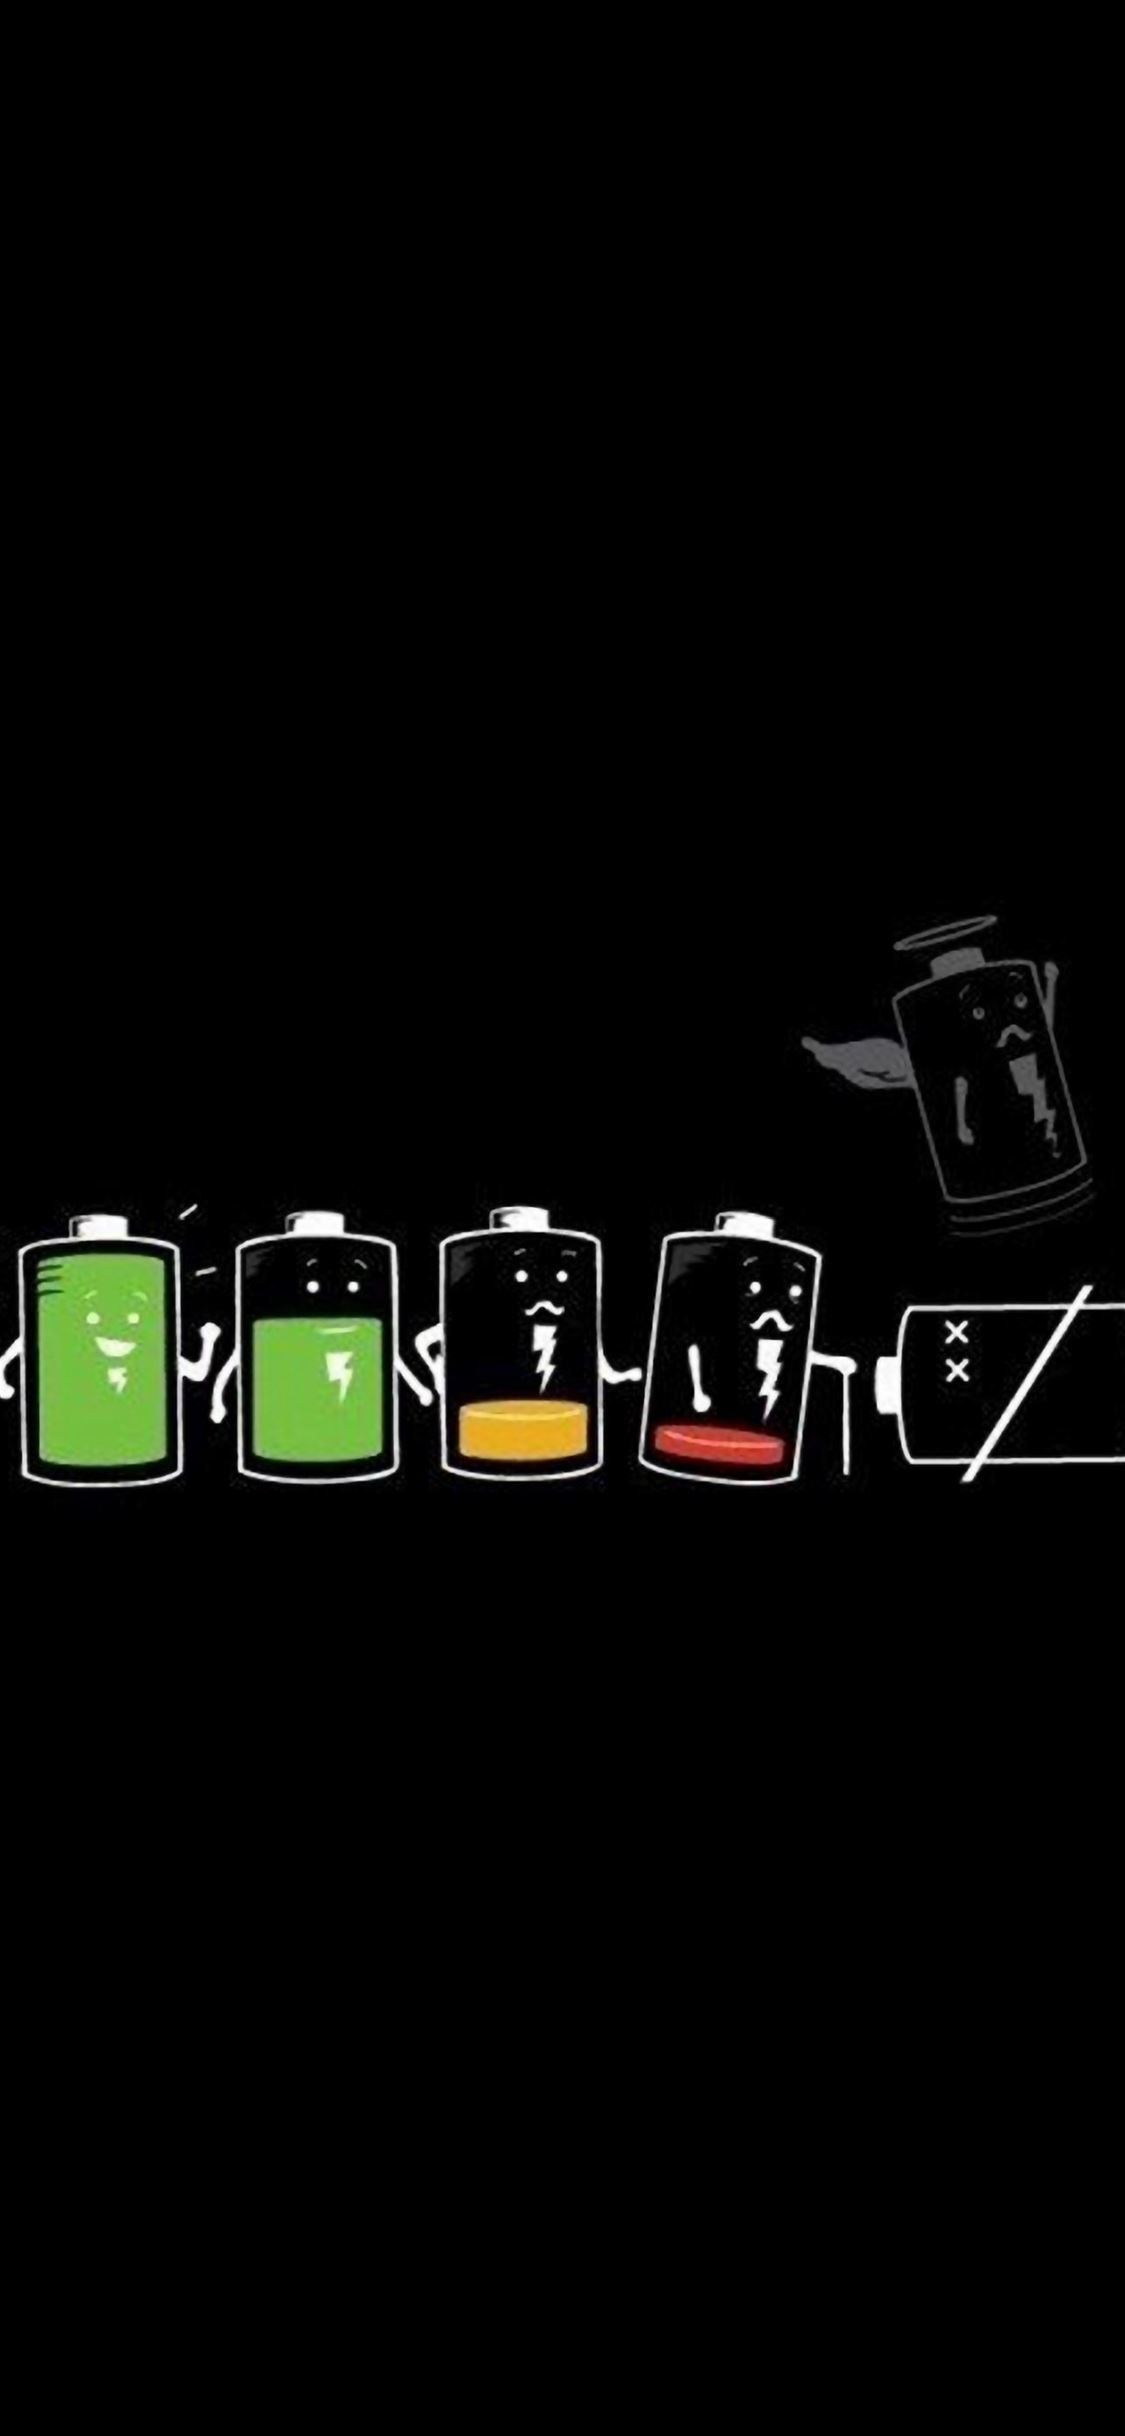 Battery Life Cycle Funny iPhone wallpaper 